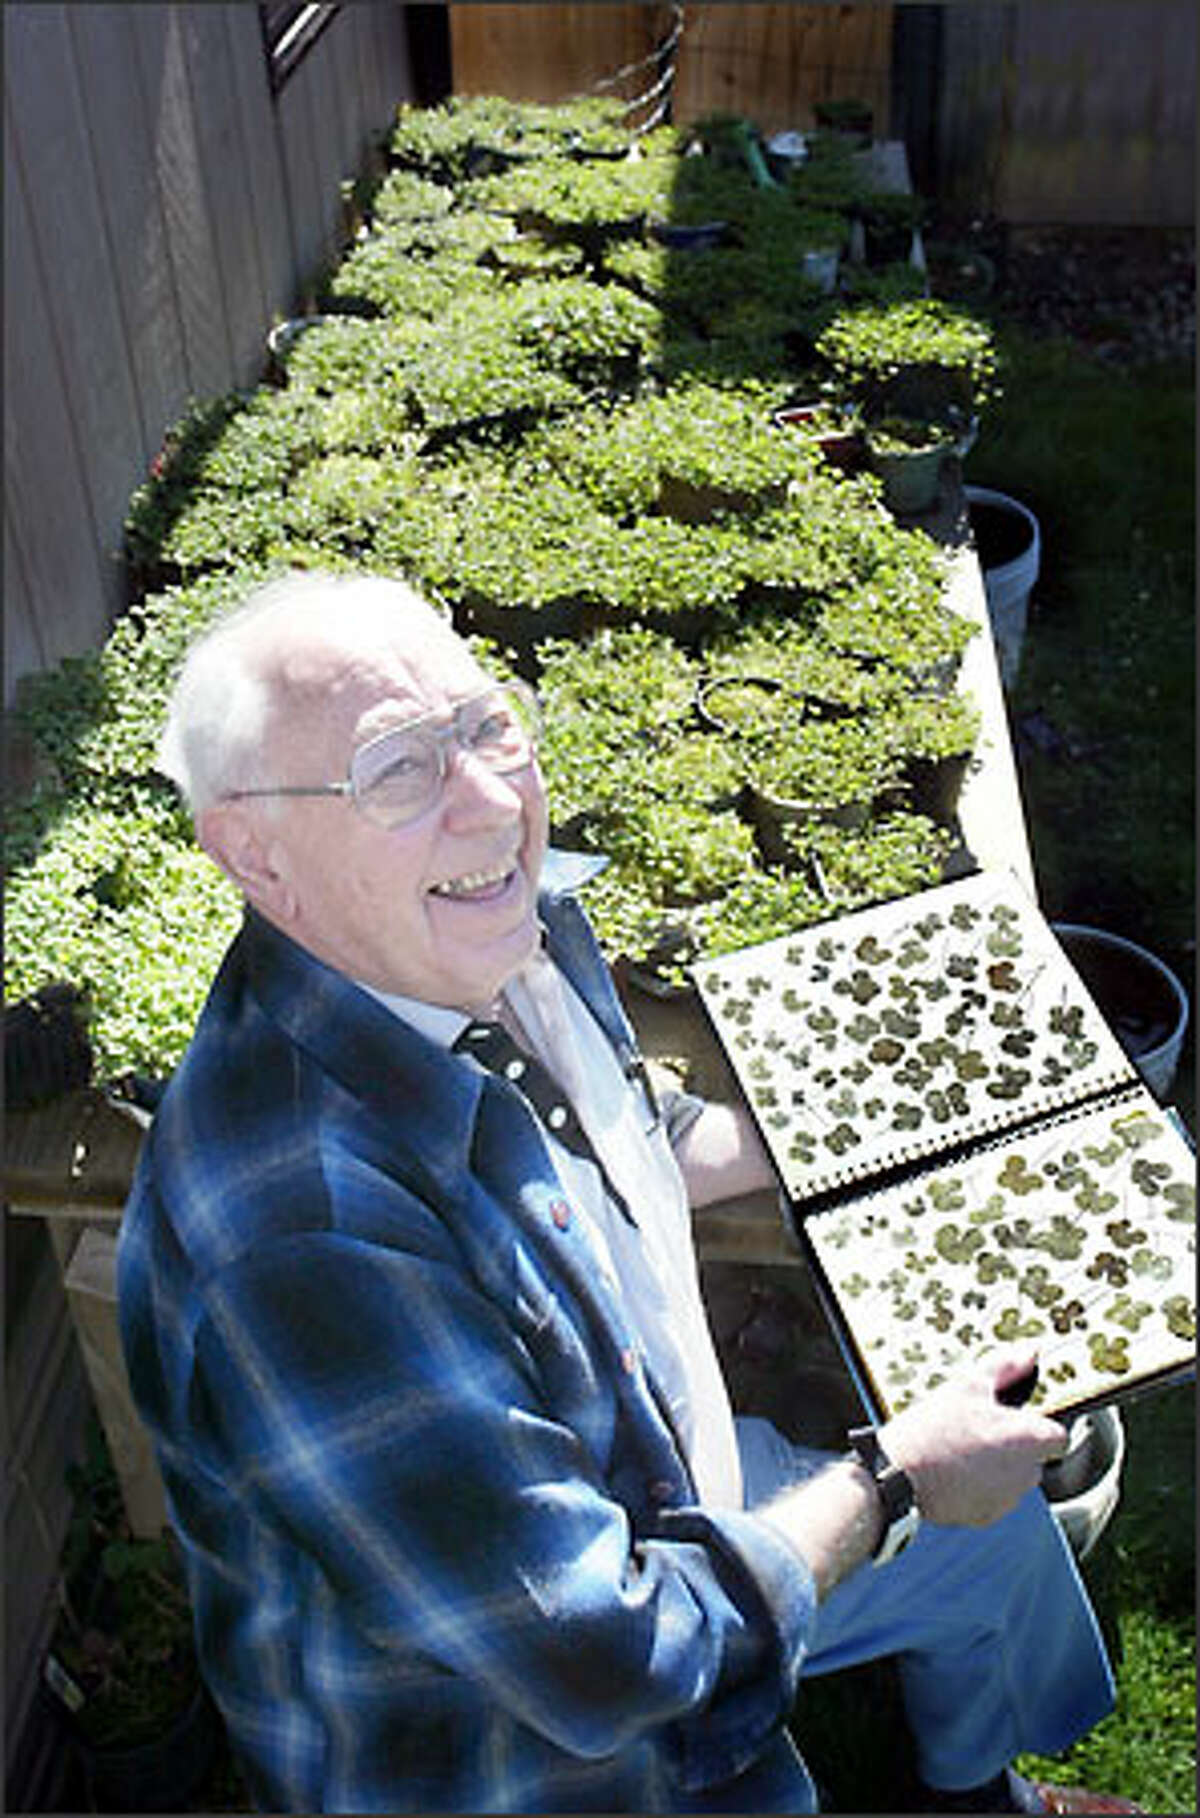 Zumbuhl displays some of his favorite clovers, but he doesn't over-romanticize them: "Clovers will grow anywhere. They're a weed."